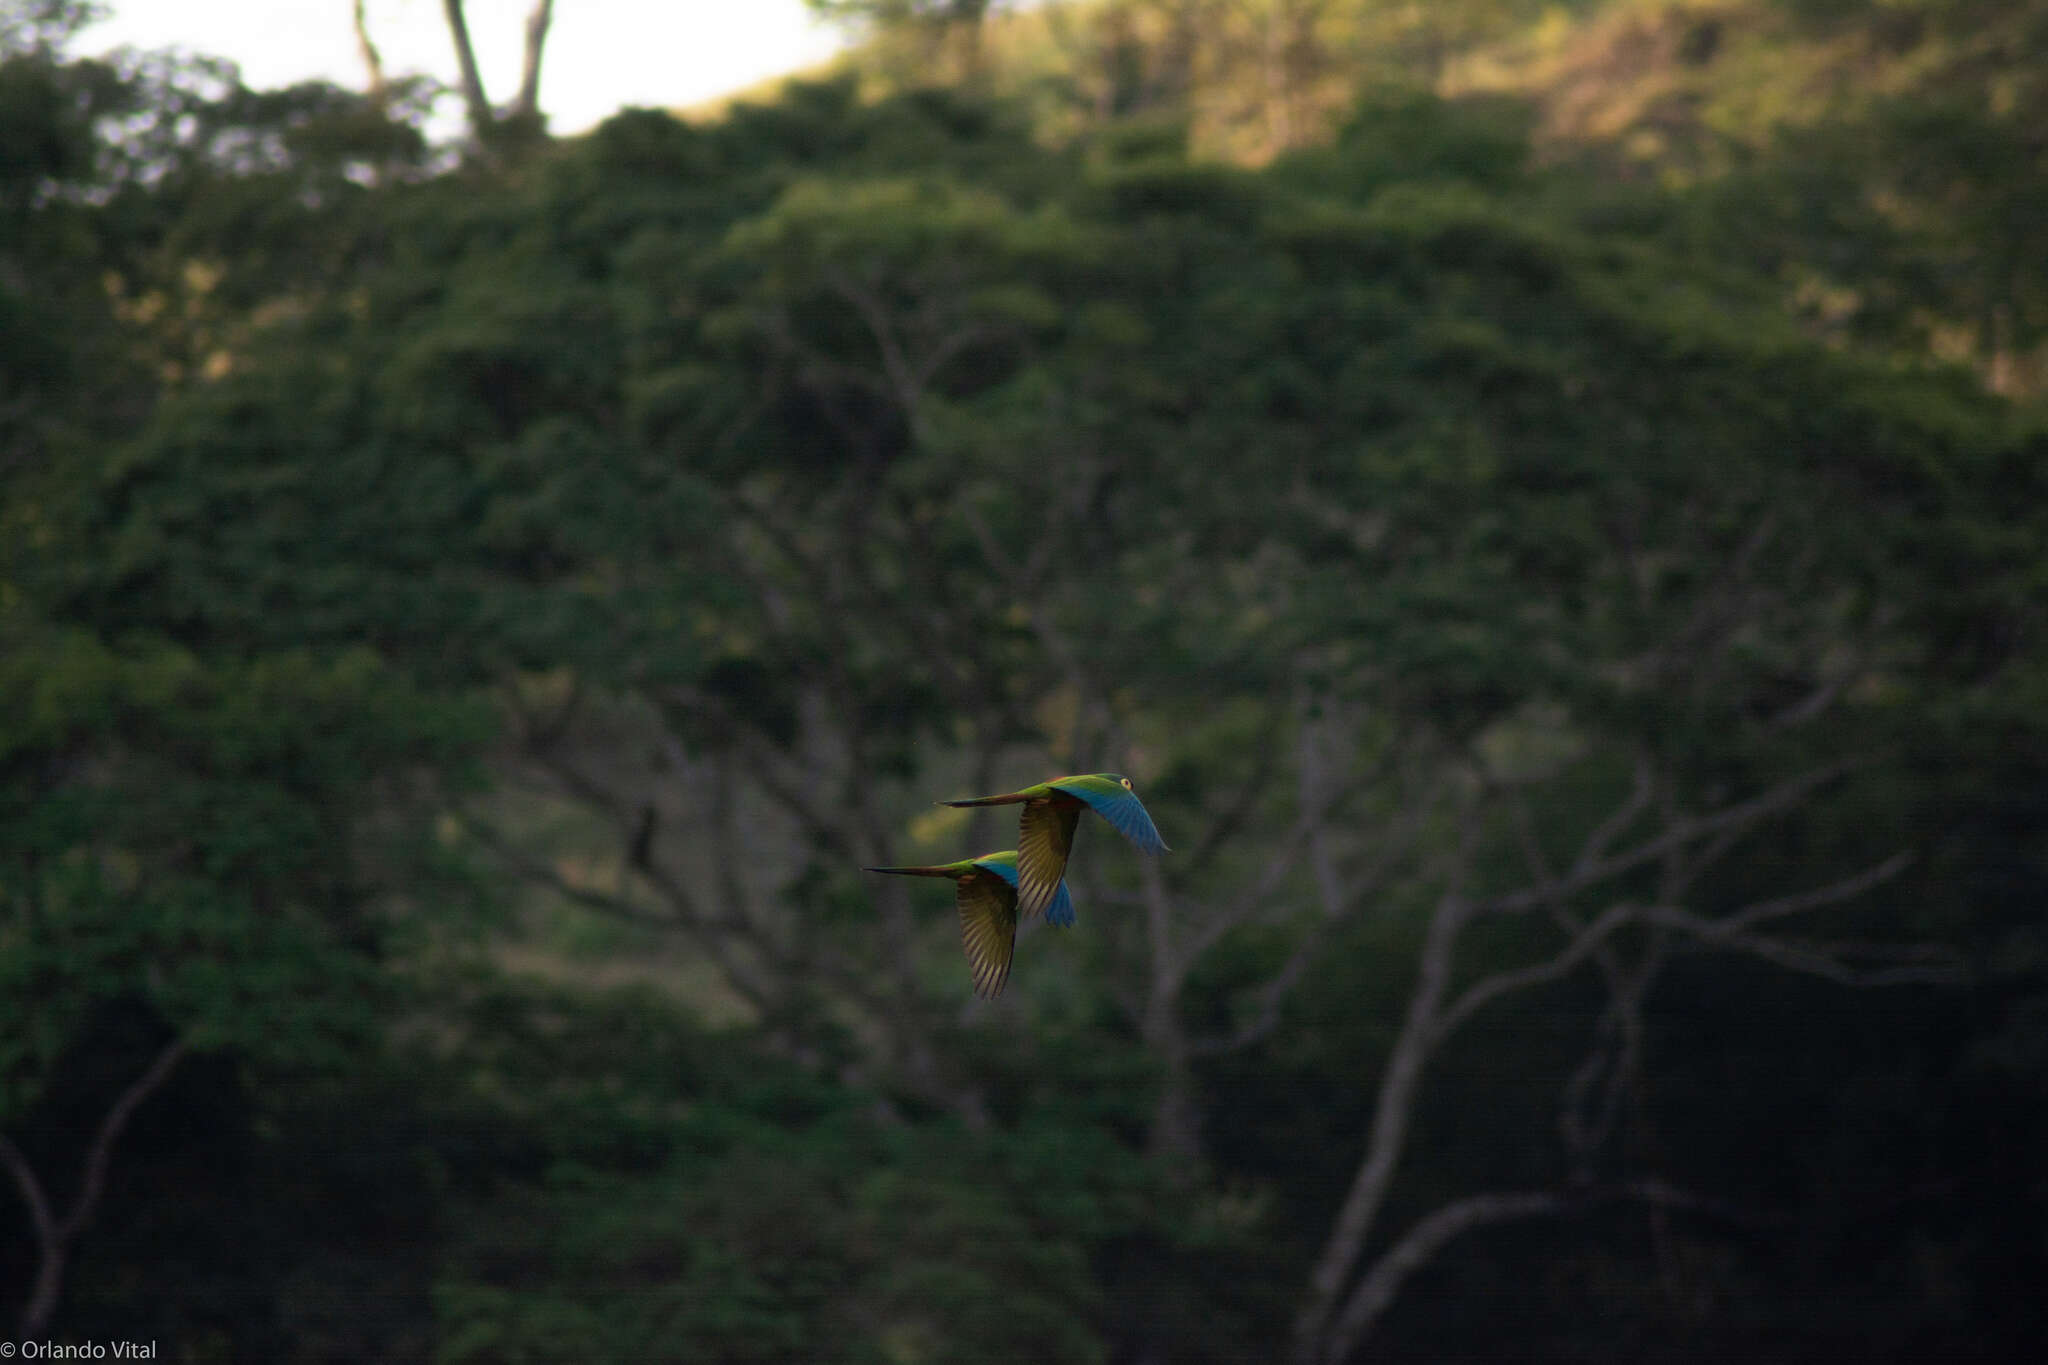 Image of Blue-winged Macaw